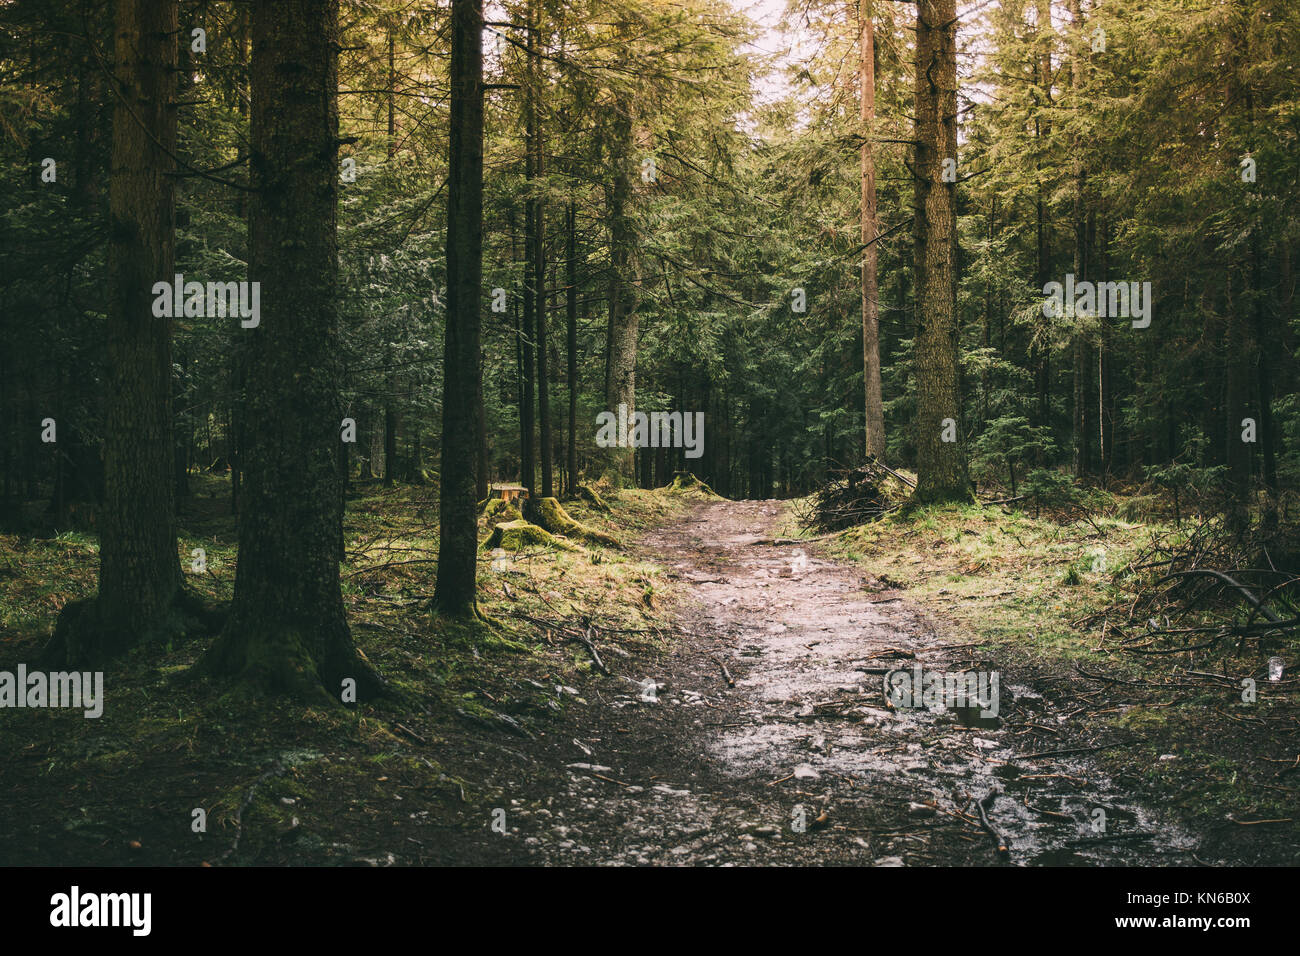 Hiking path in forest with light shining through the trees Stock Photo